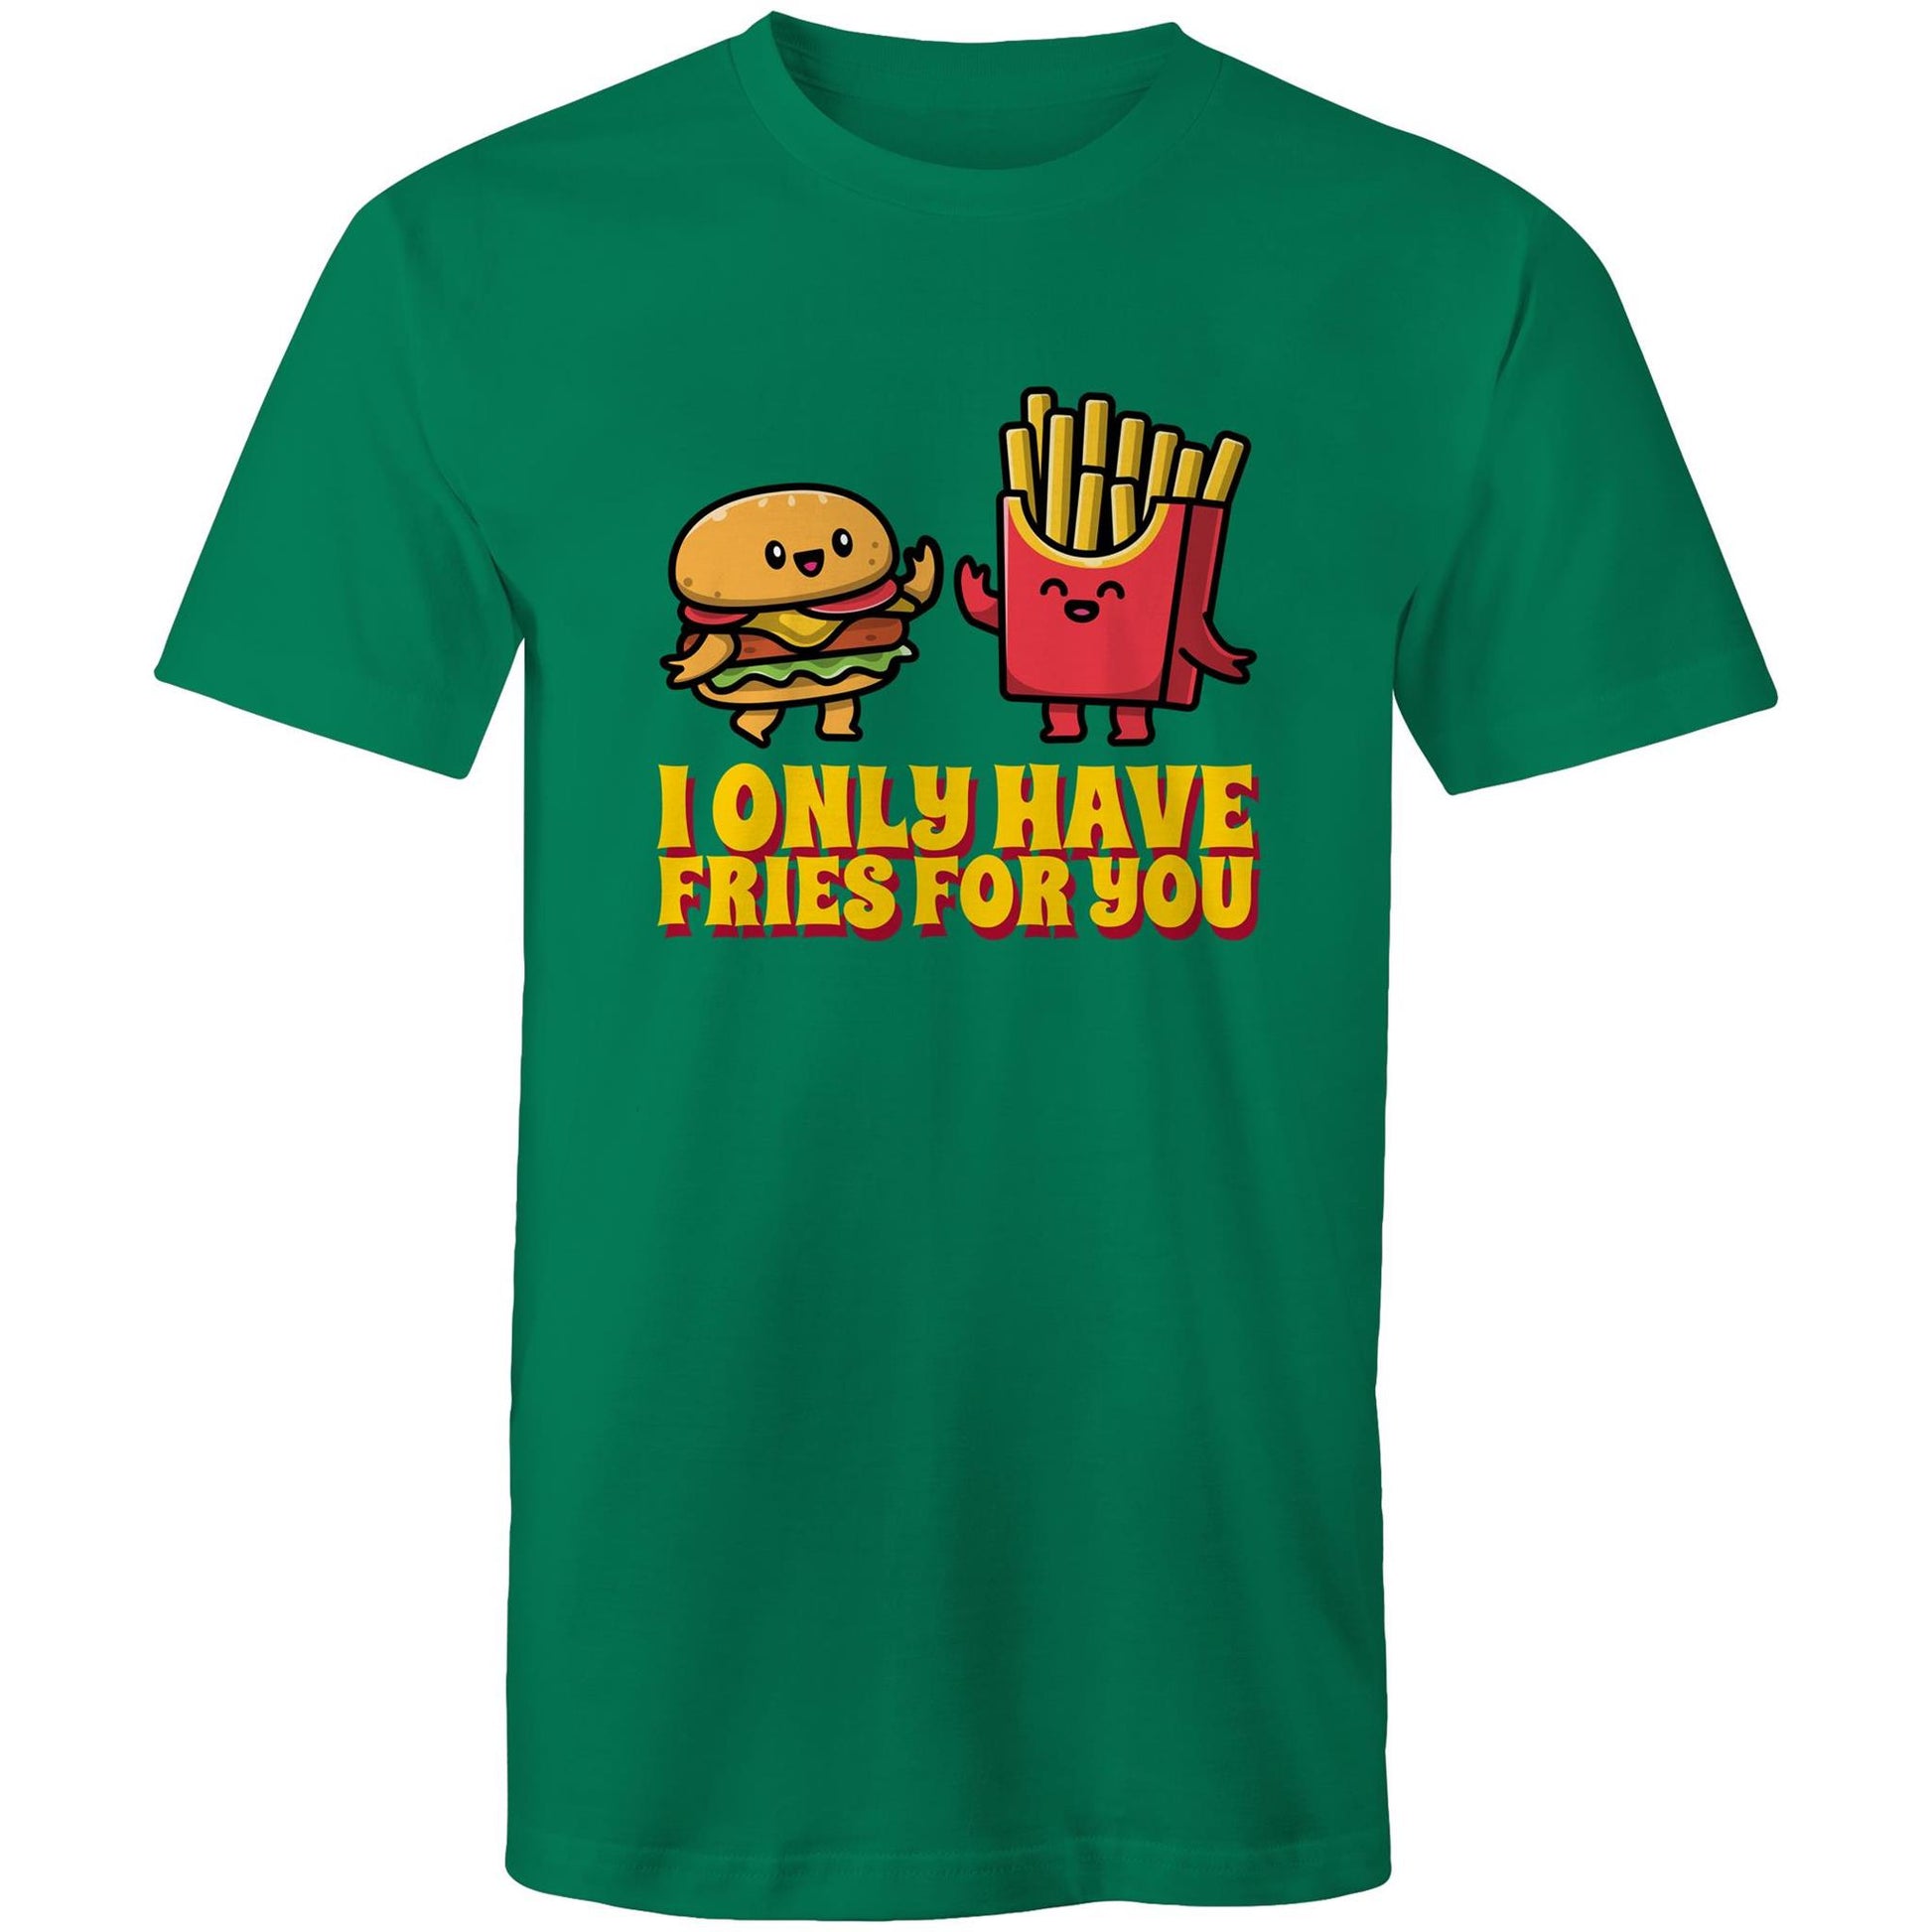 I Only Have Fries For You, Burger And Fries - Mens T-Shirt Kelly Green Mens T-shirt